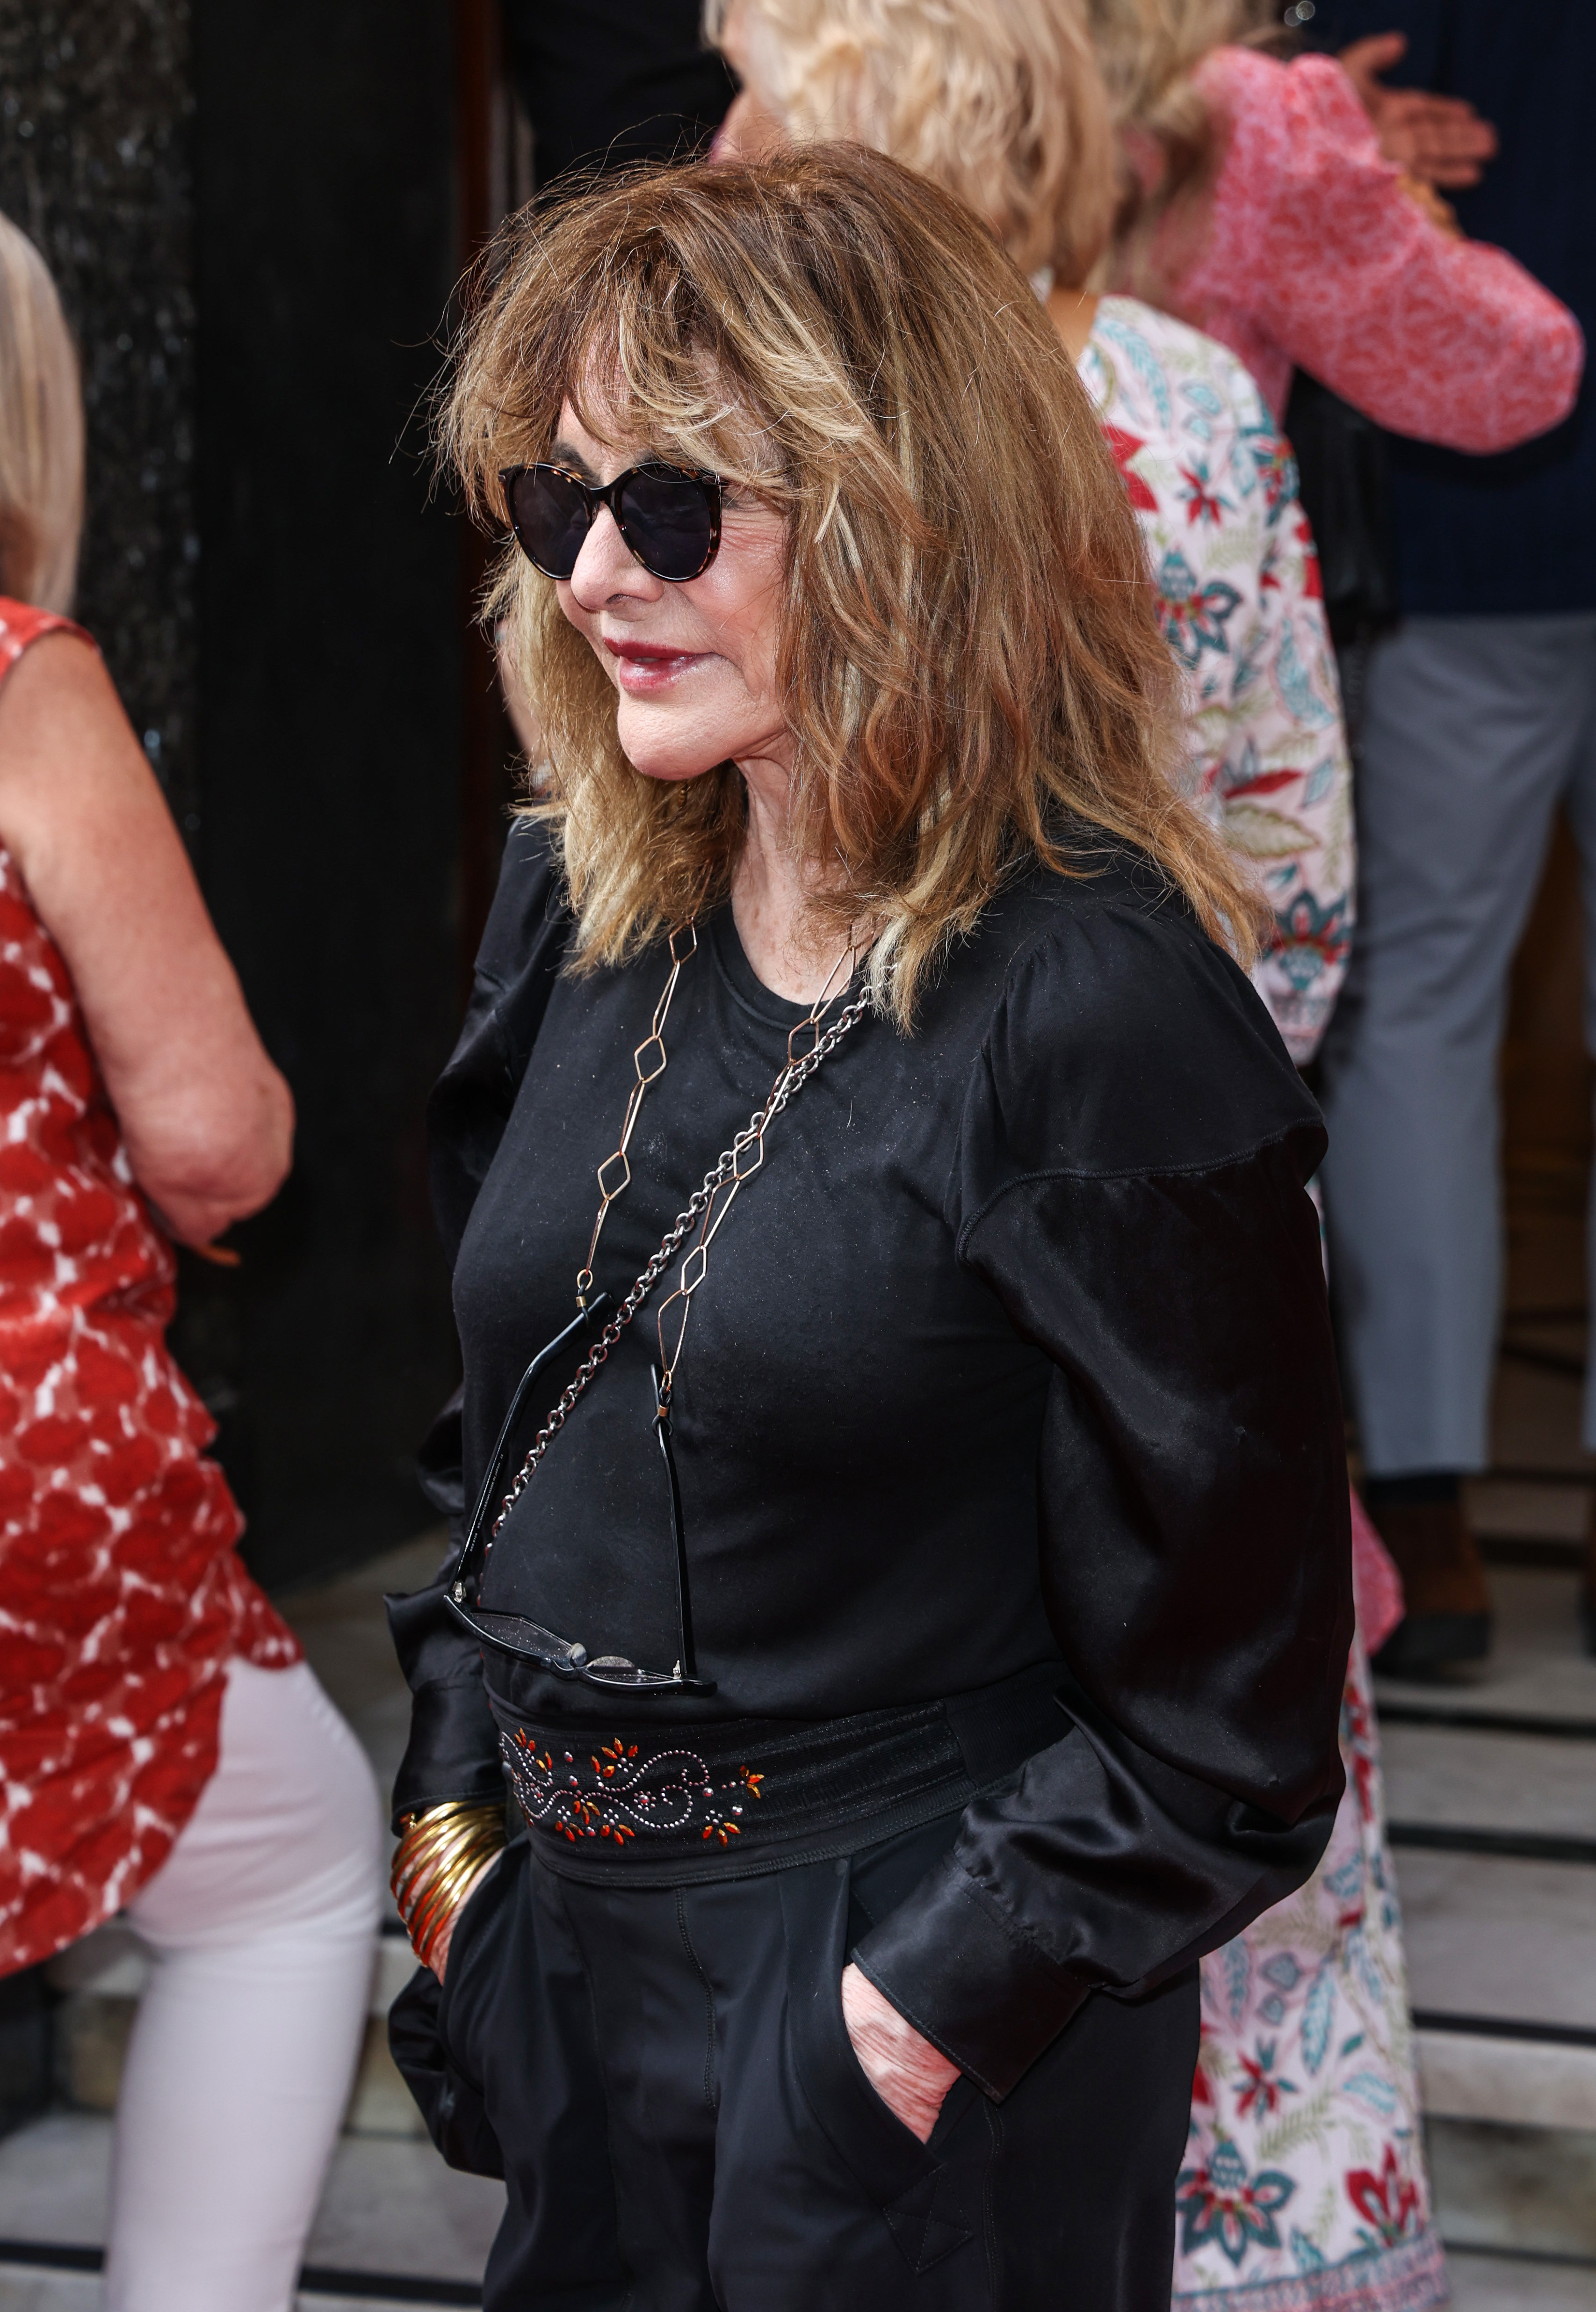 Grease star Stockard Channing at a performance of Hello, Dolly! in London, England